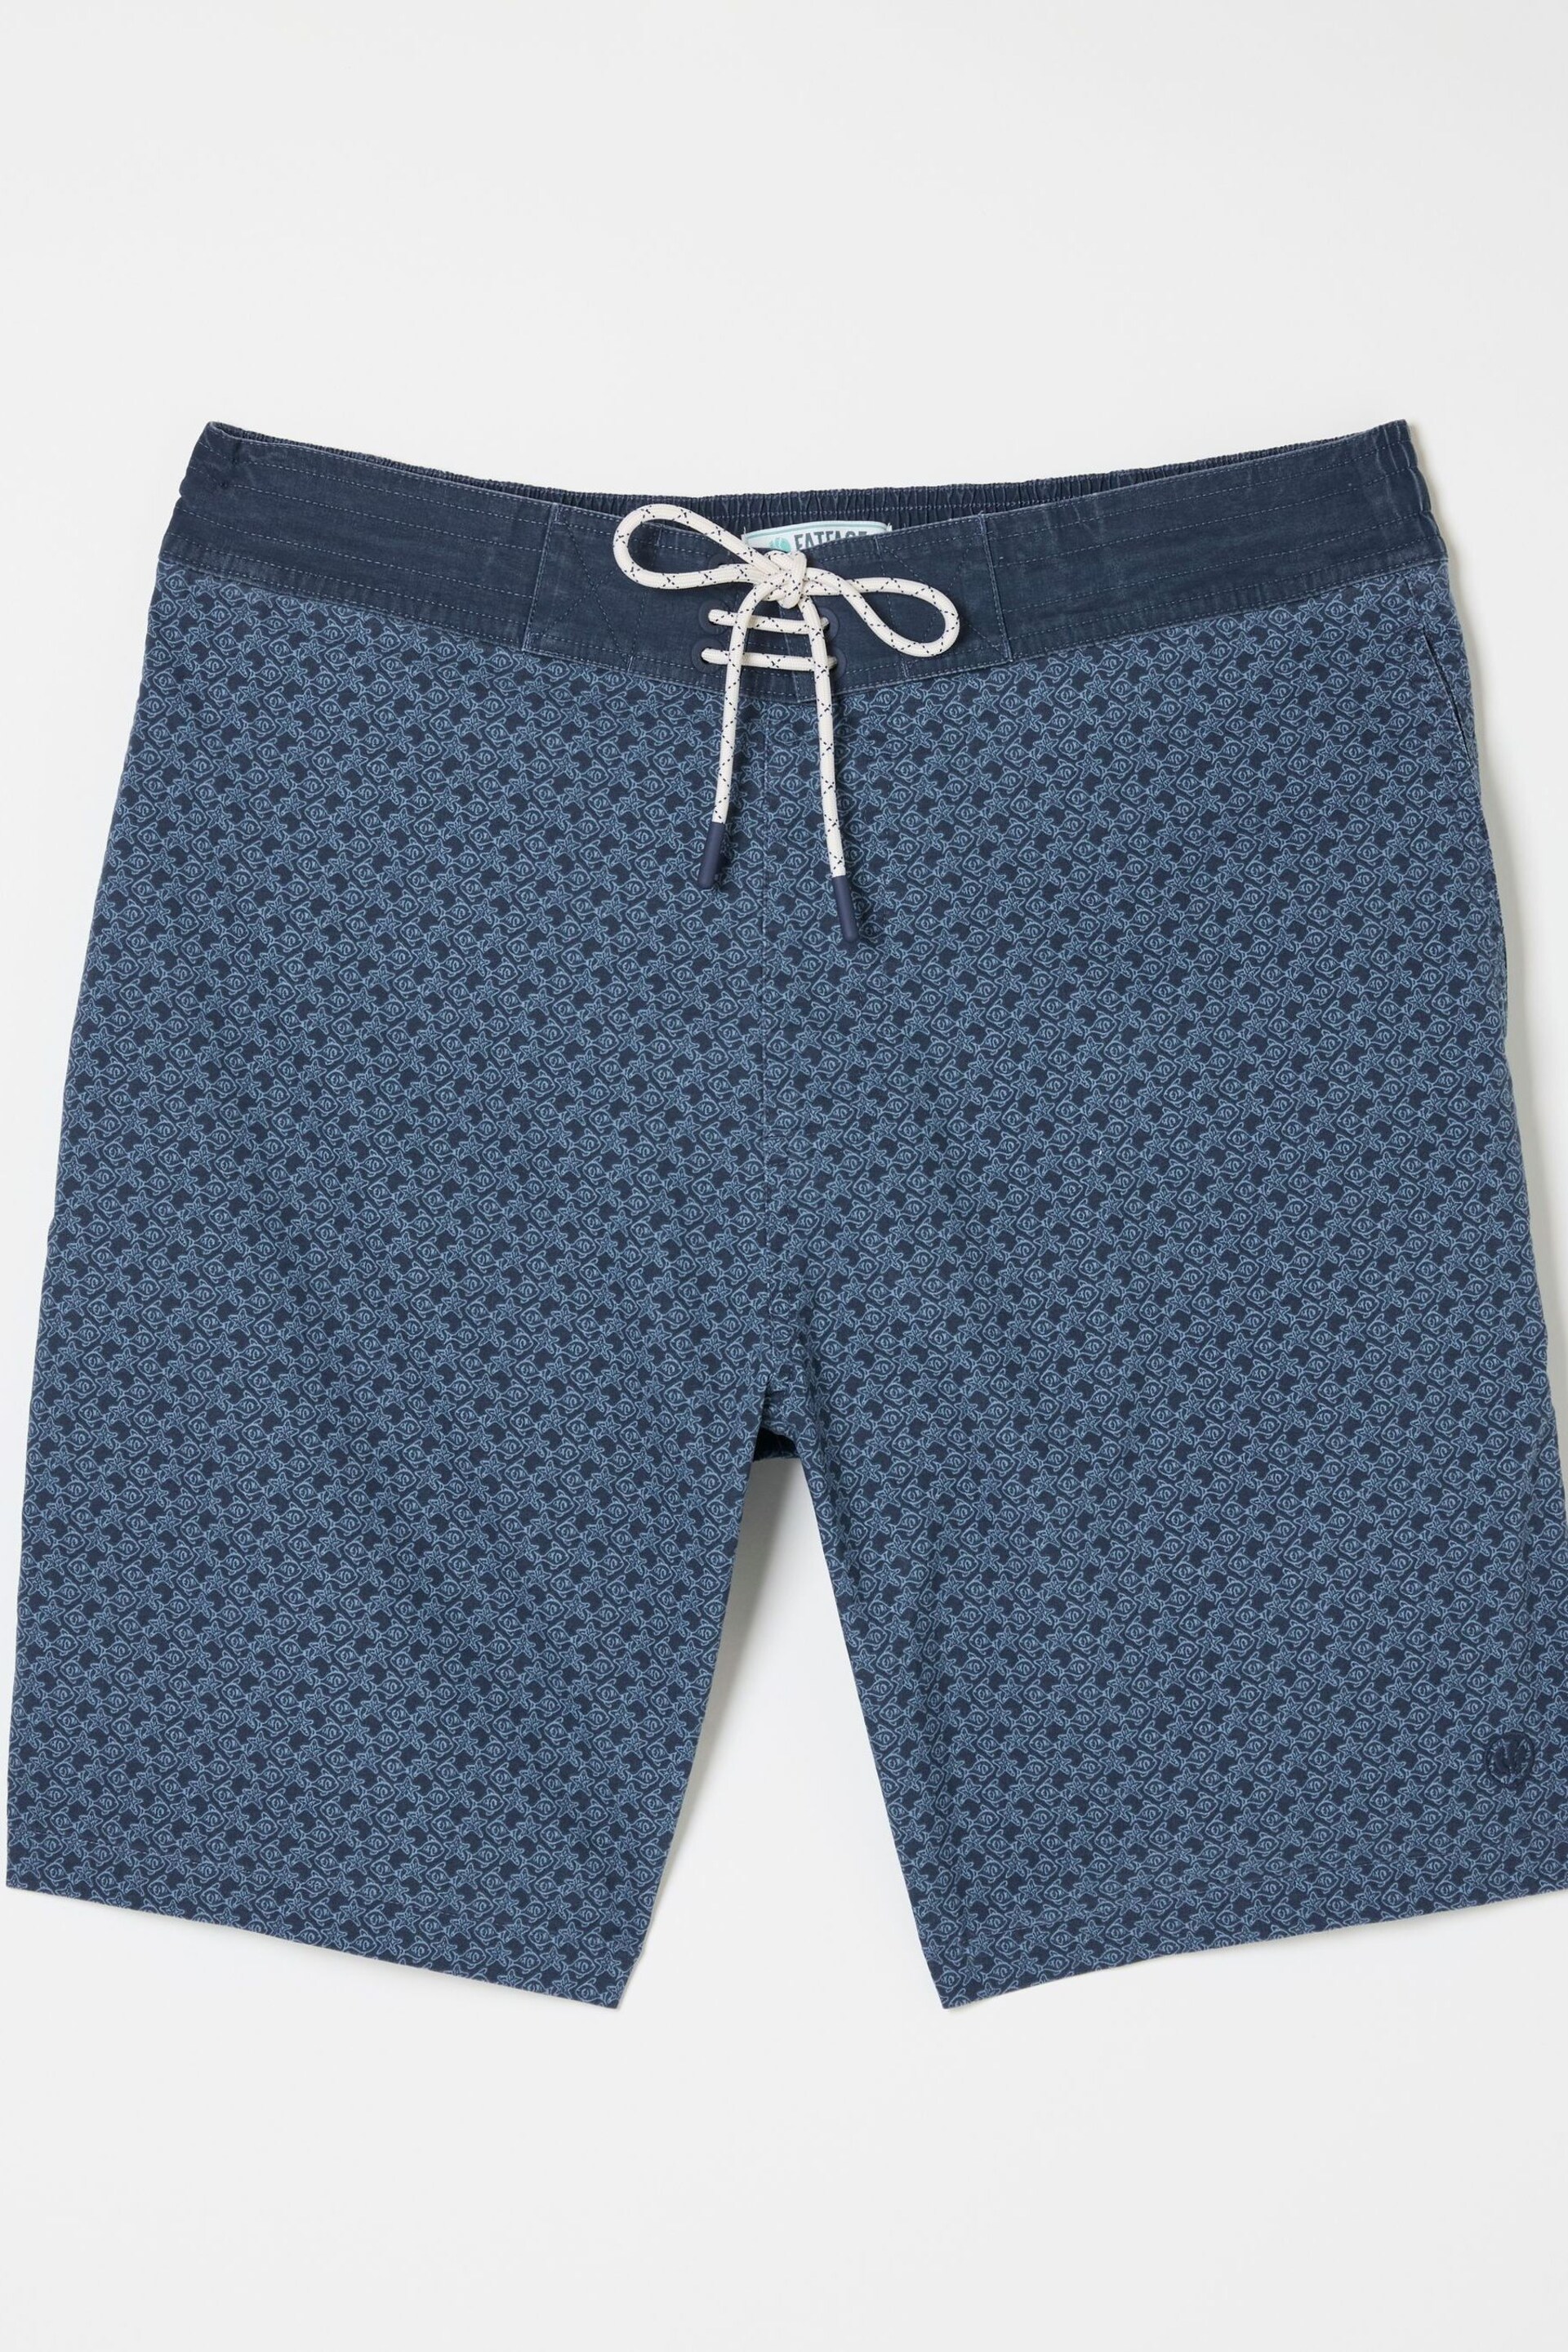 FatFace Blue Camber Star Fish Swim Shorts - Image 5 of 5